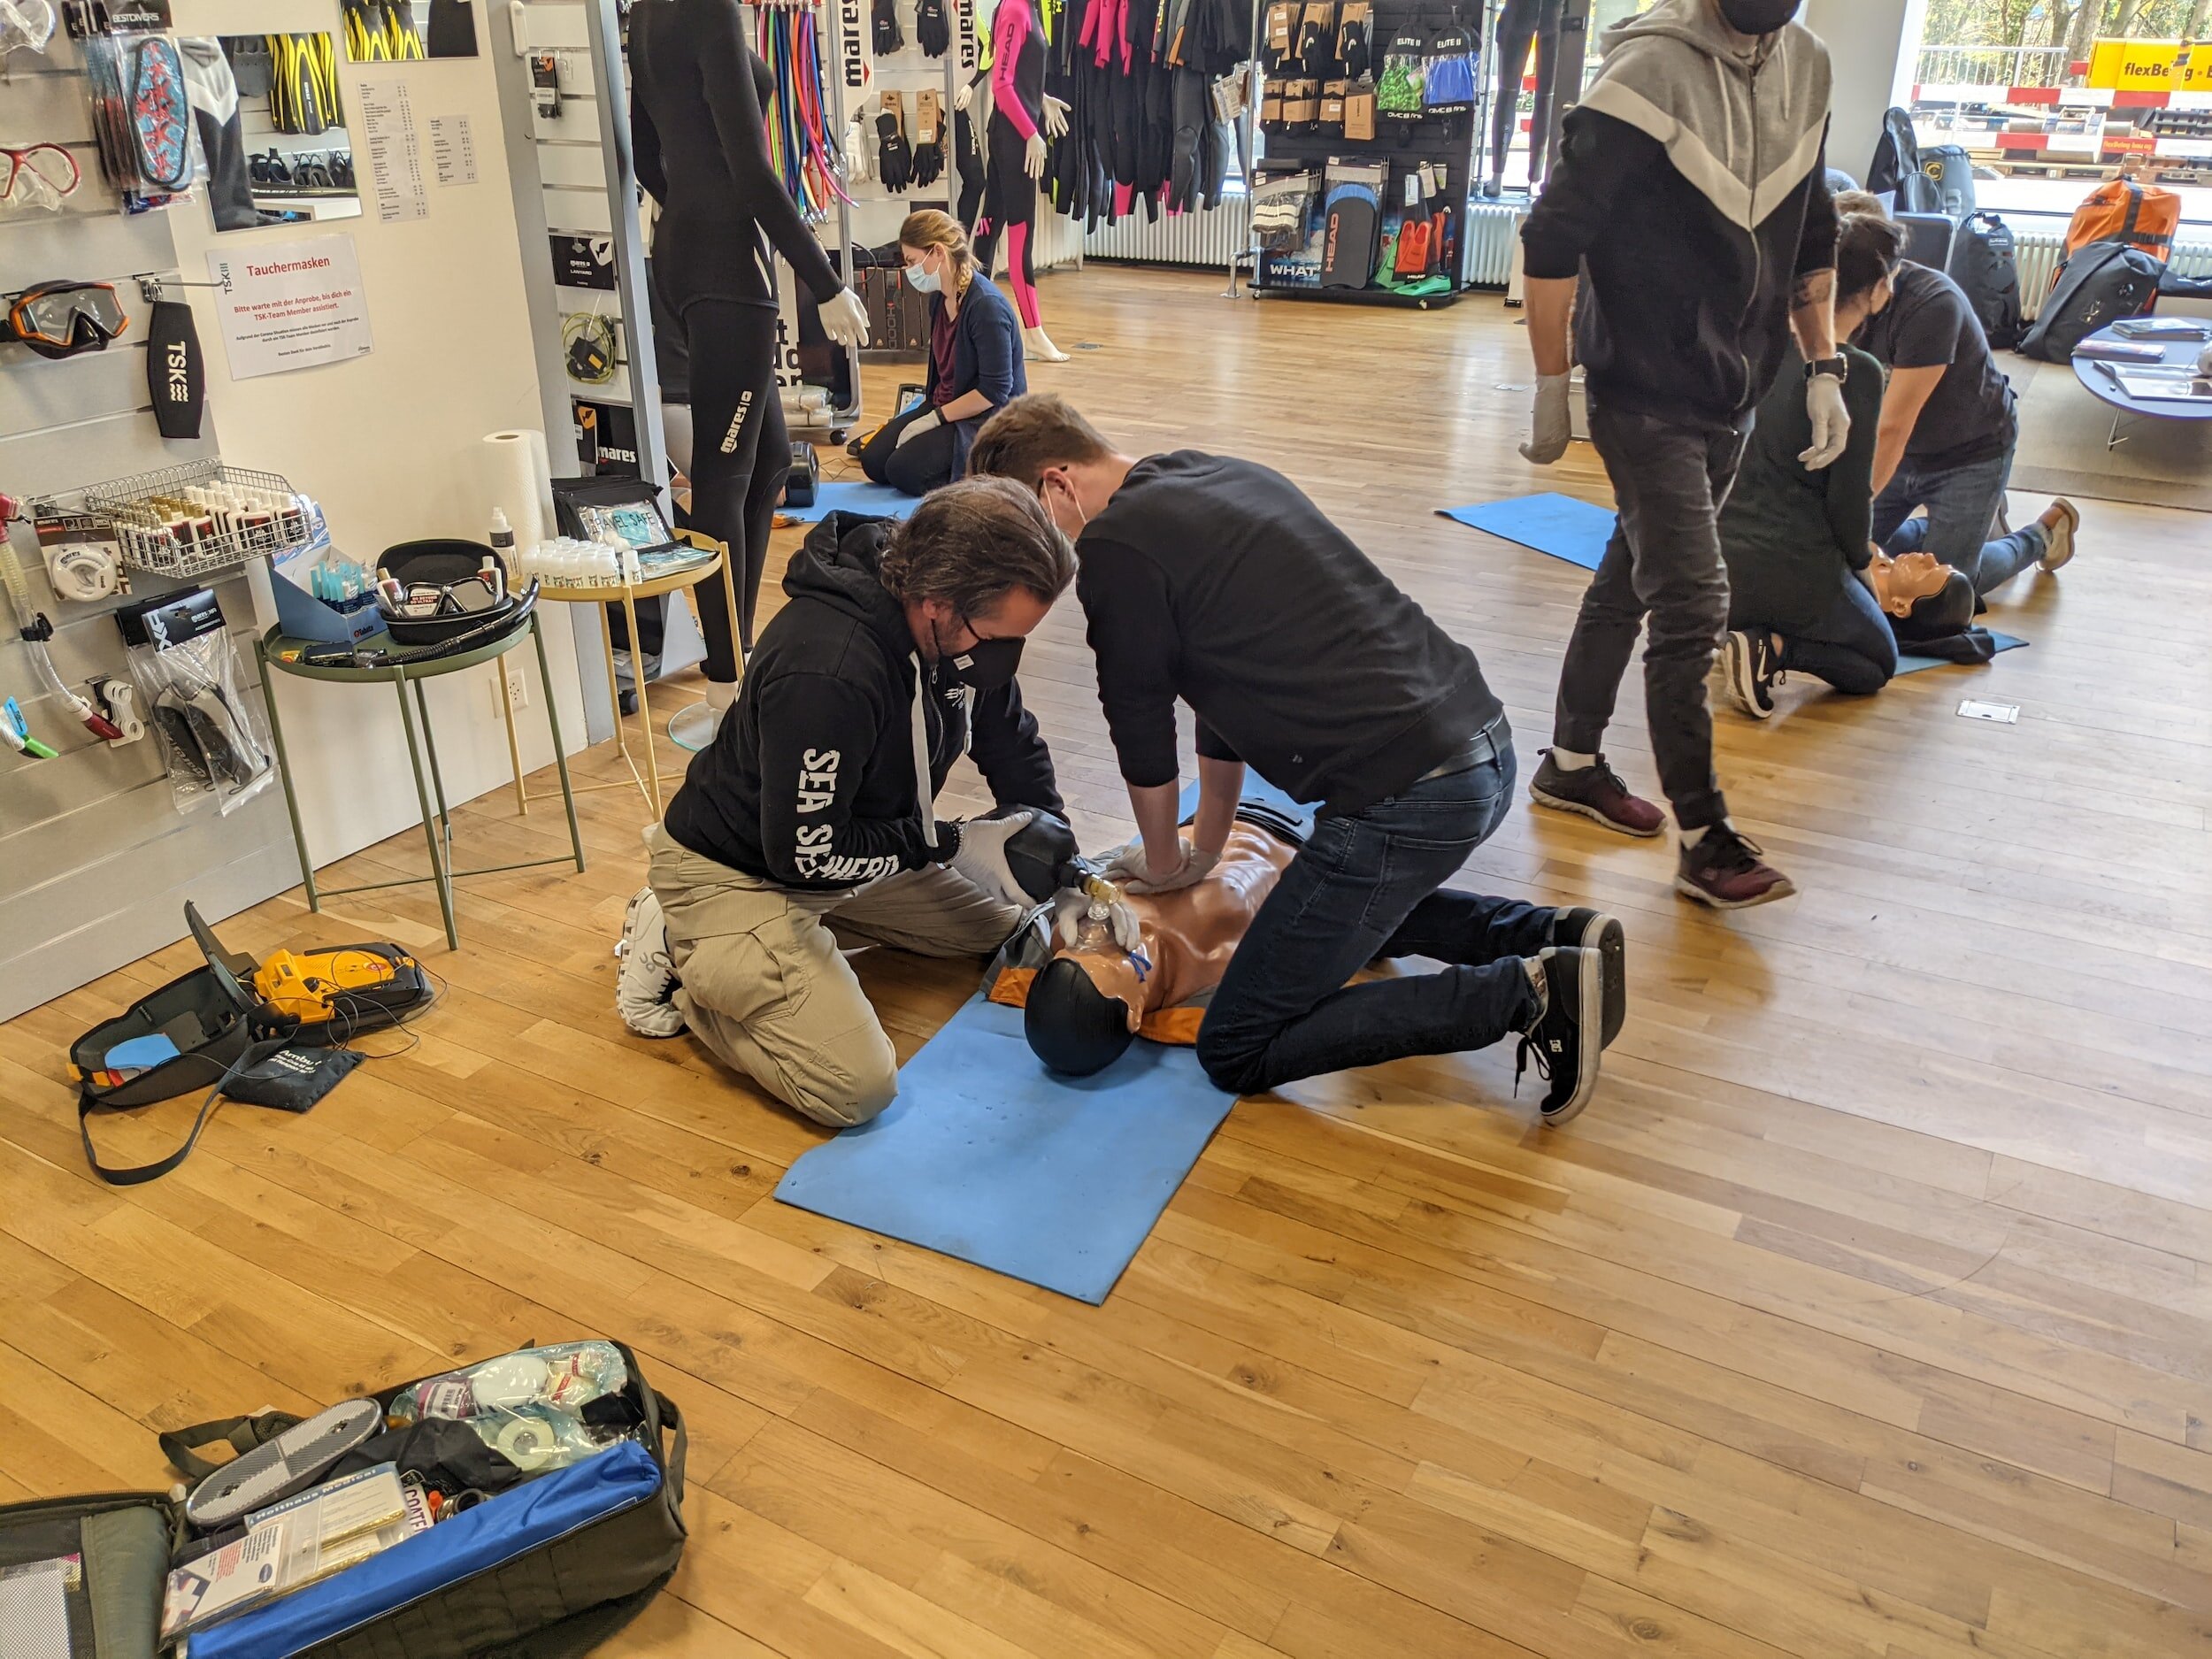 First Aid Courses In Norwich | NR Medical Training